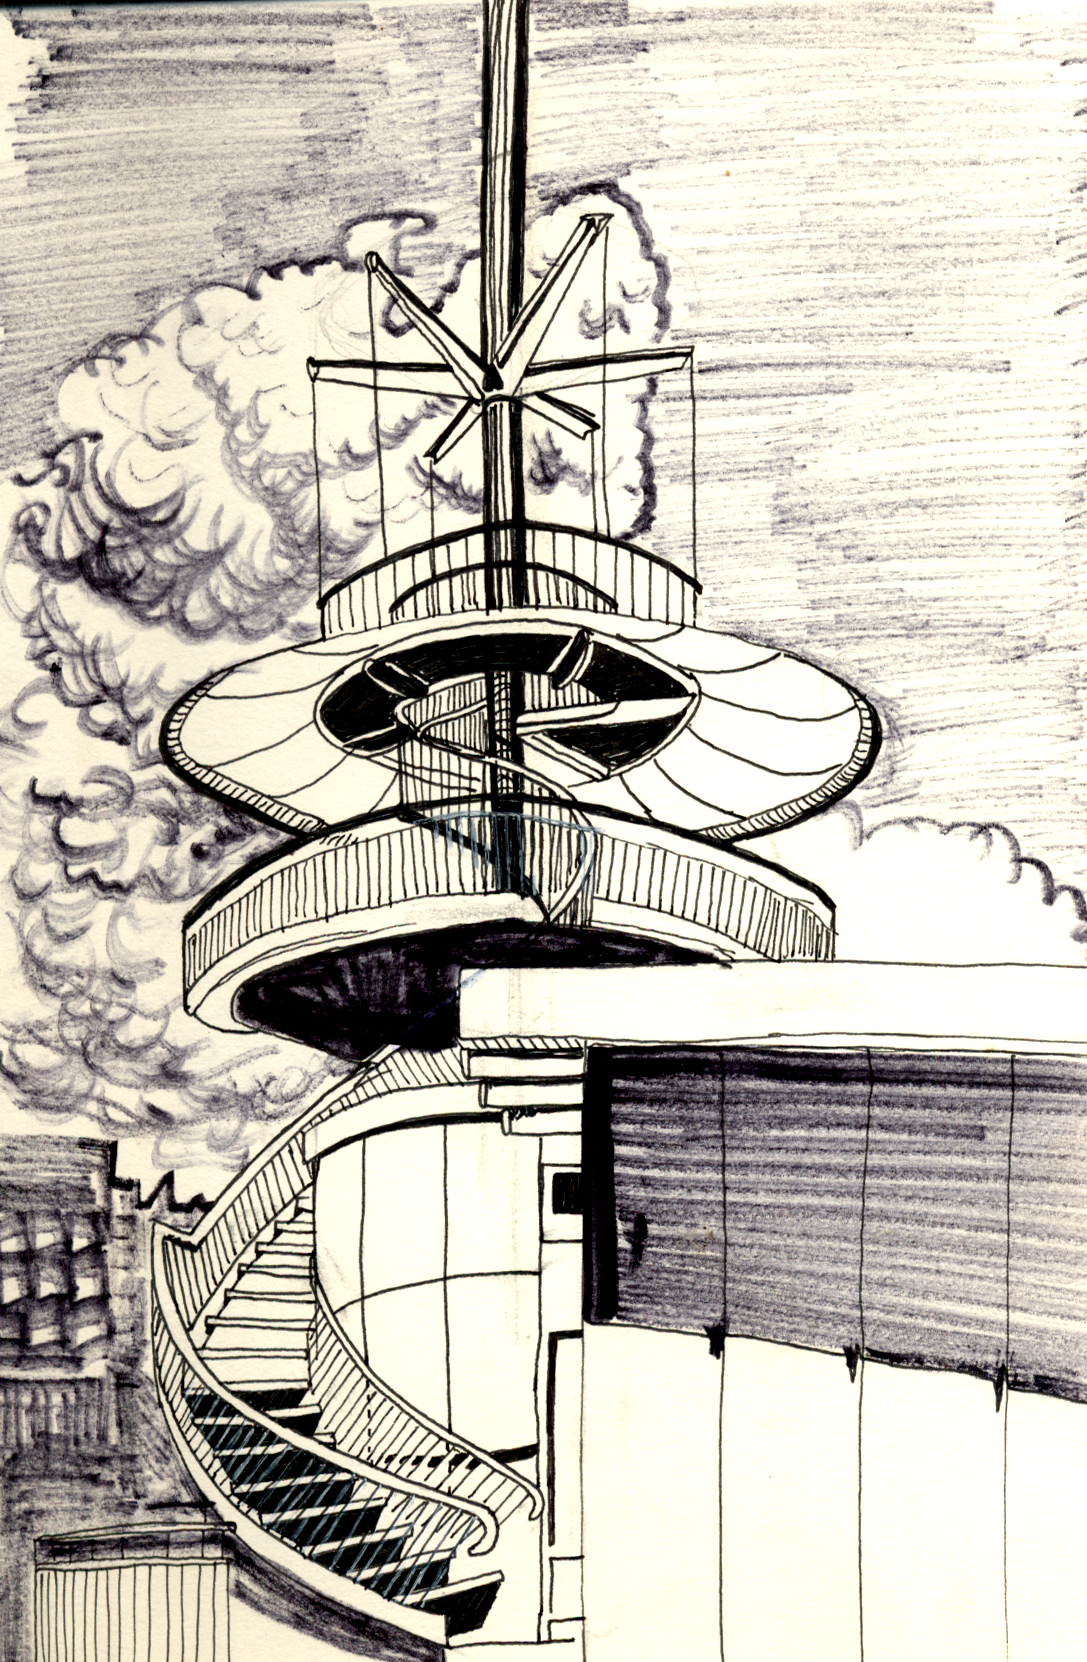 A drawing of an architecturally interesting structure, Bristol